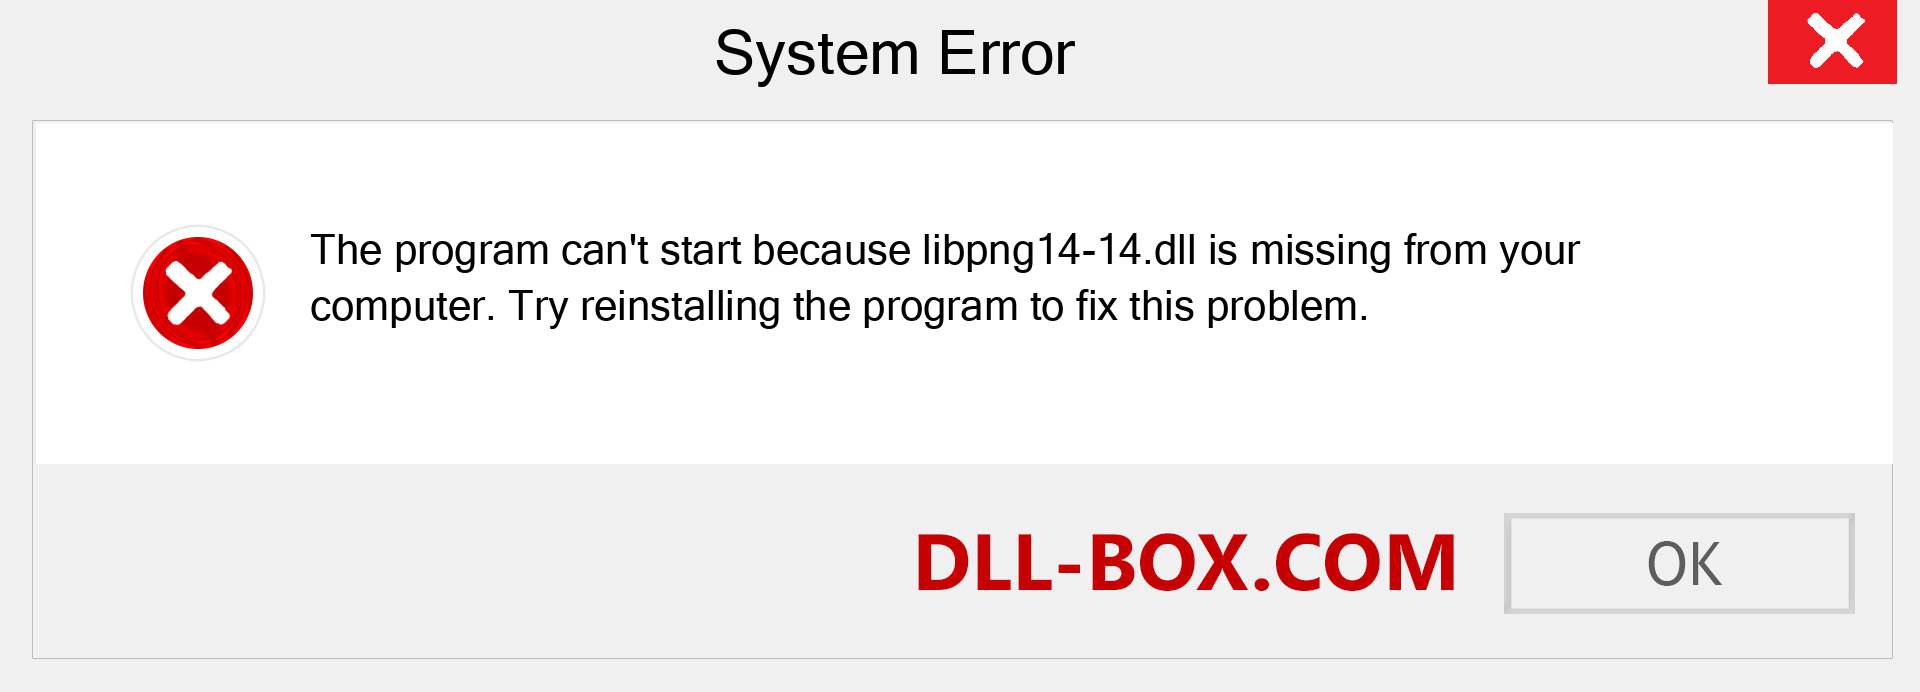  libpng14-14.dll file is missing?. Download for Windows 7, 8, 10 - Fix  libpng14-14 dll Missing Error on Windows, photos, images